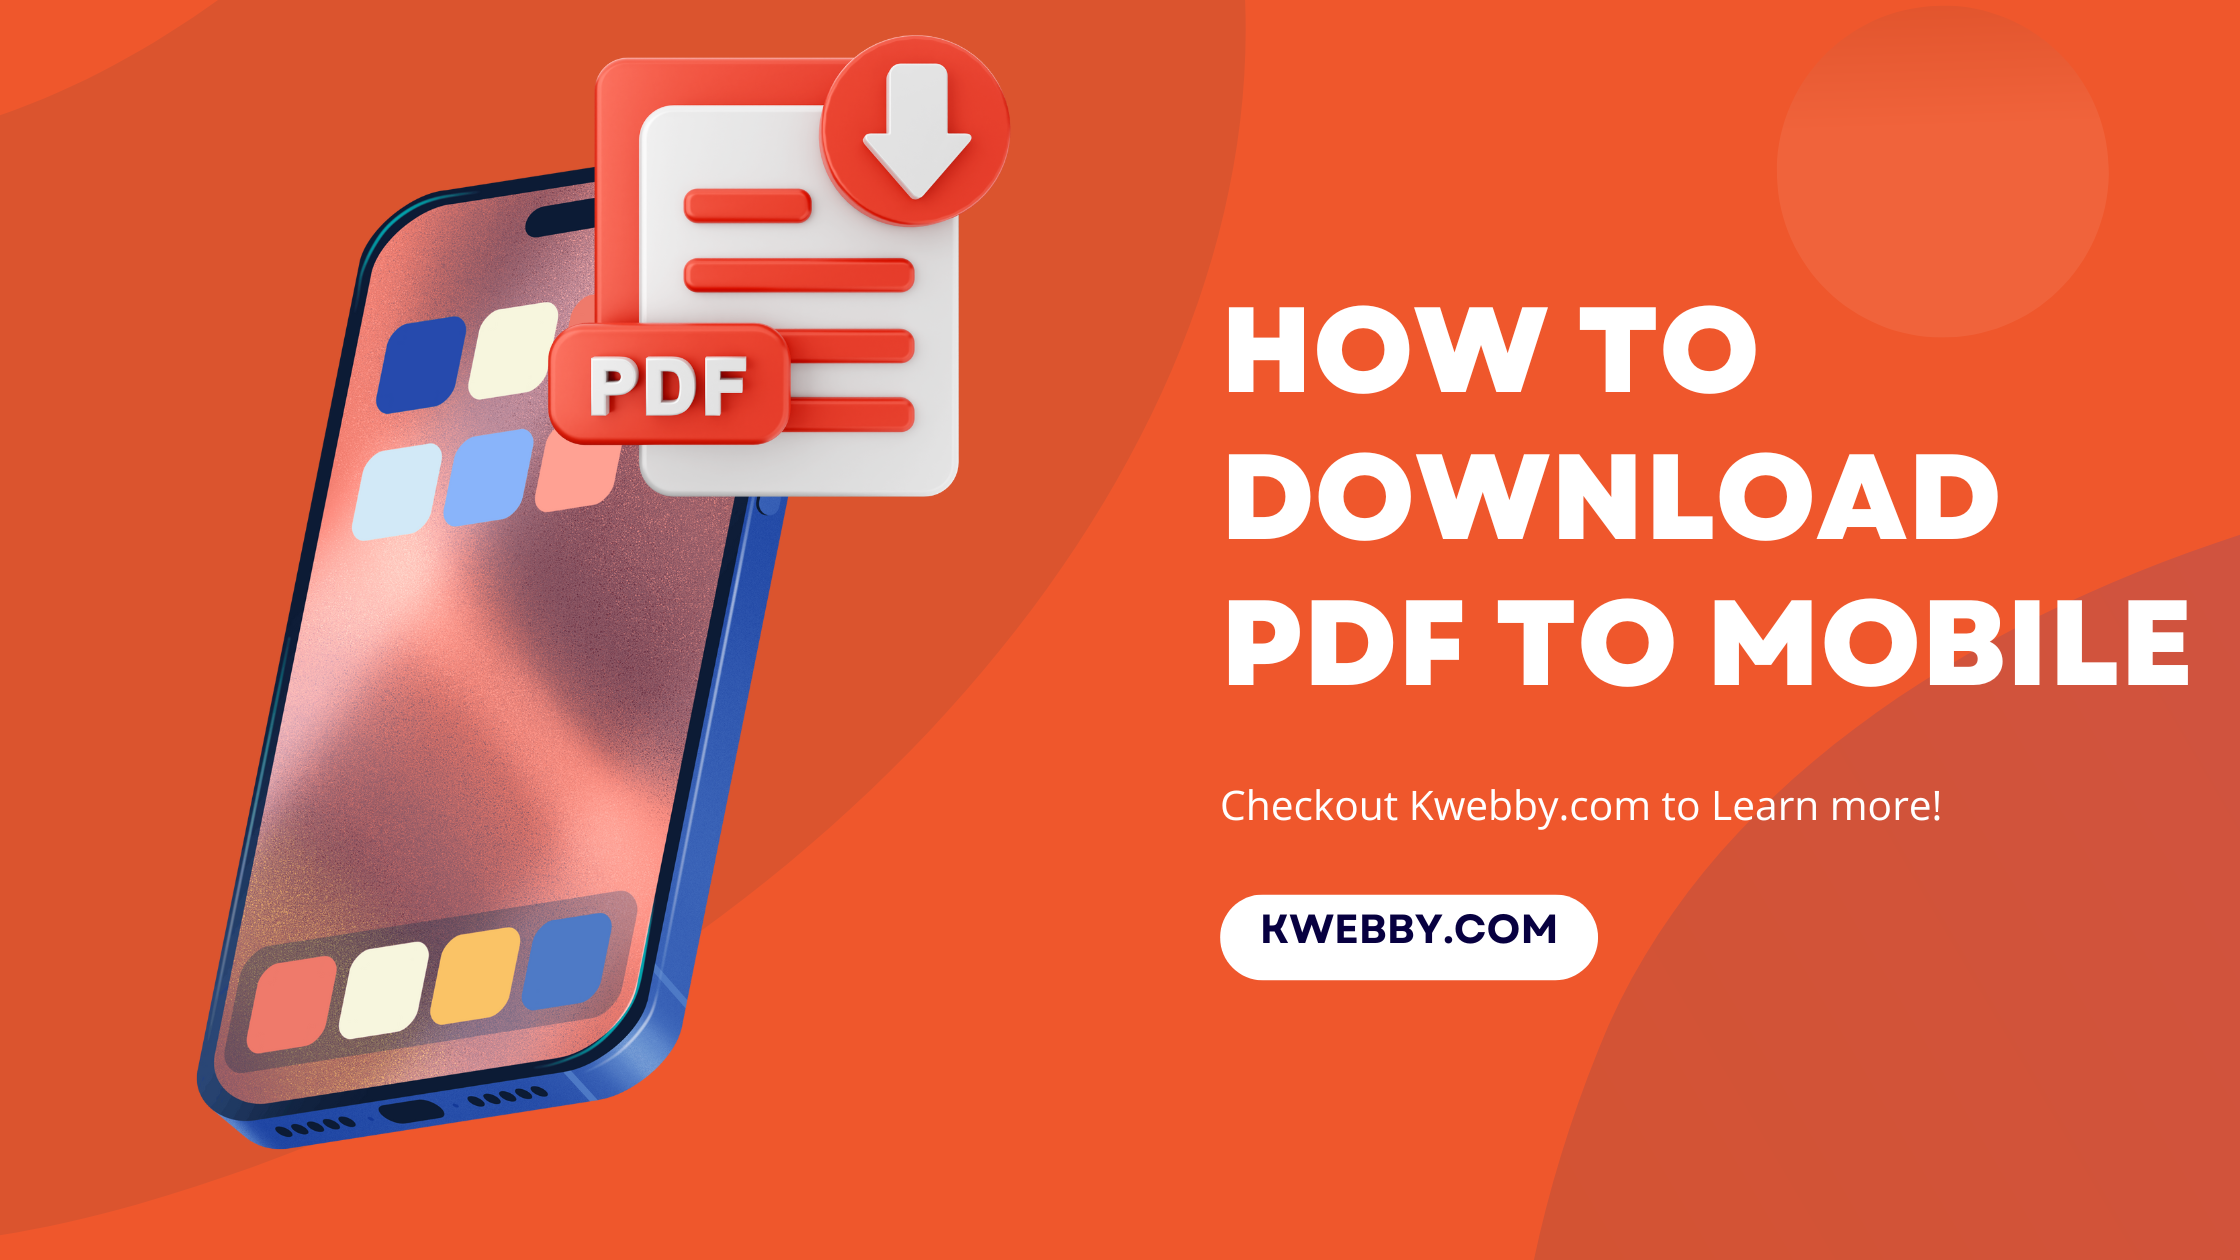 How to download PDF to mobile